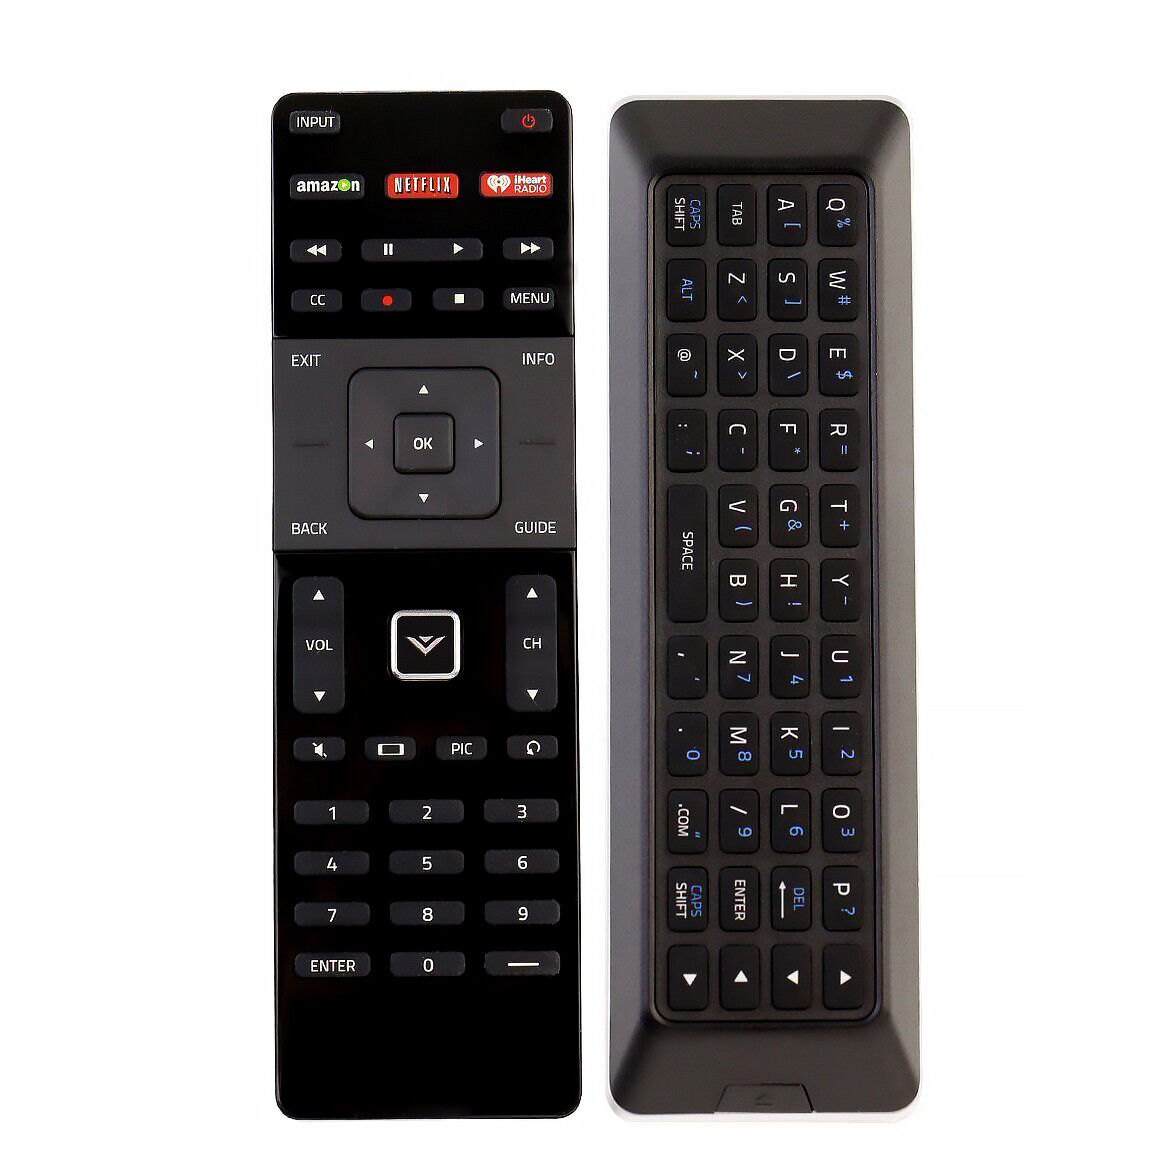 New XRT500 LED remote Control with QWERTY keyboard backlight for VIZIO Smart TV Vizio XRT500